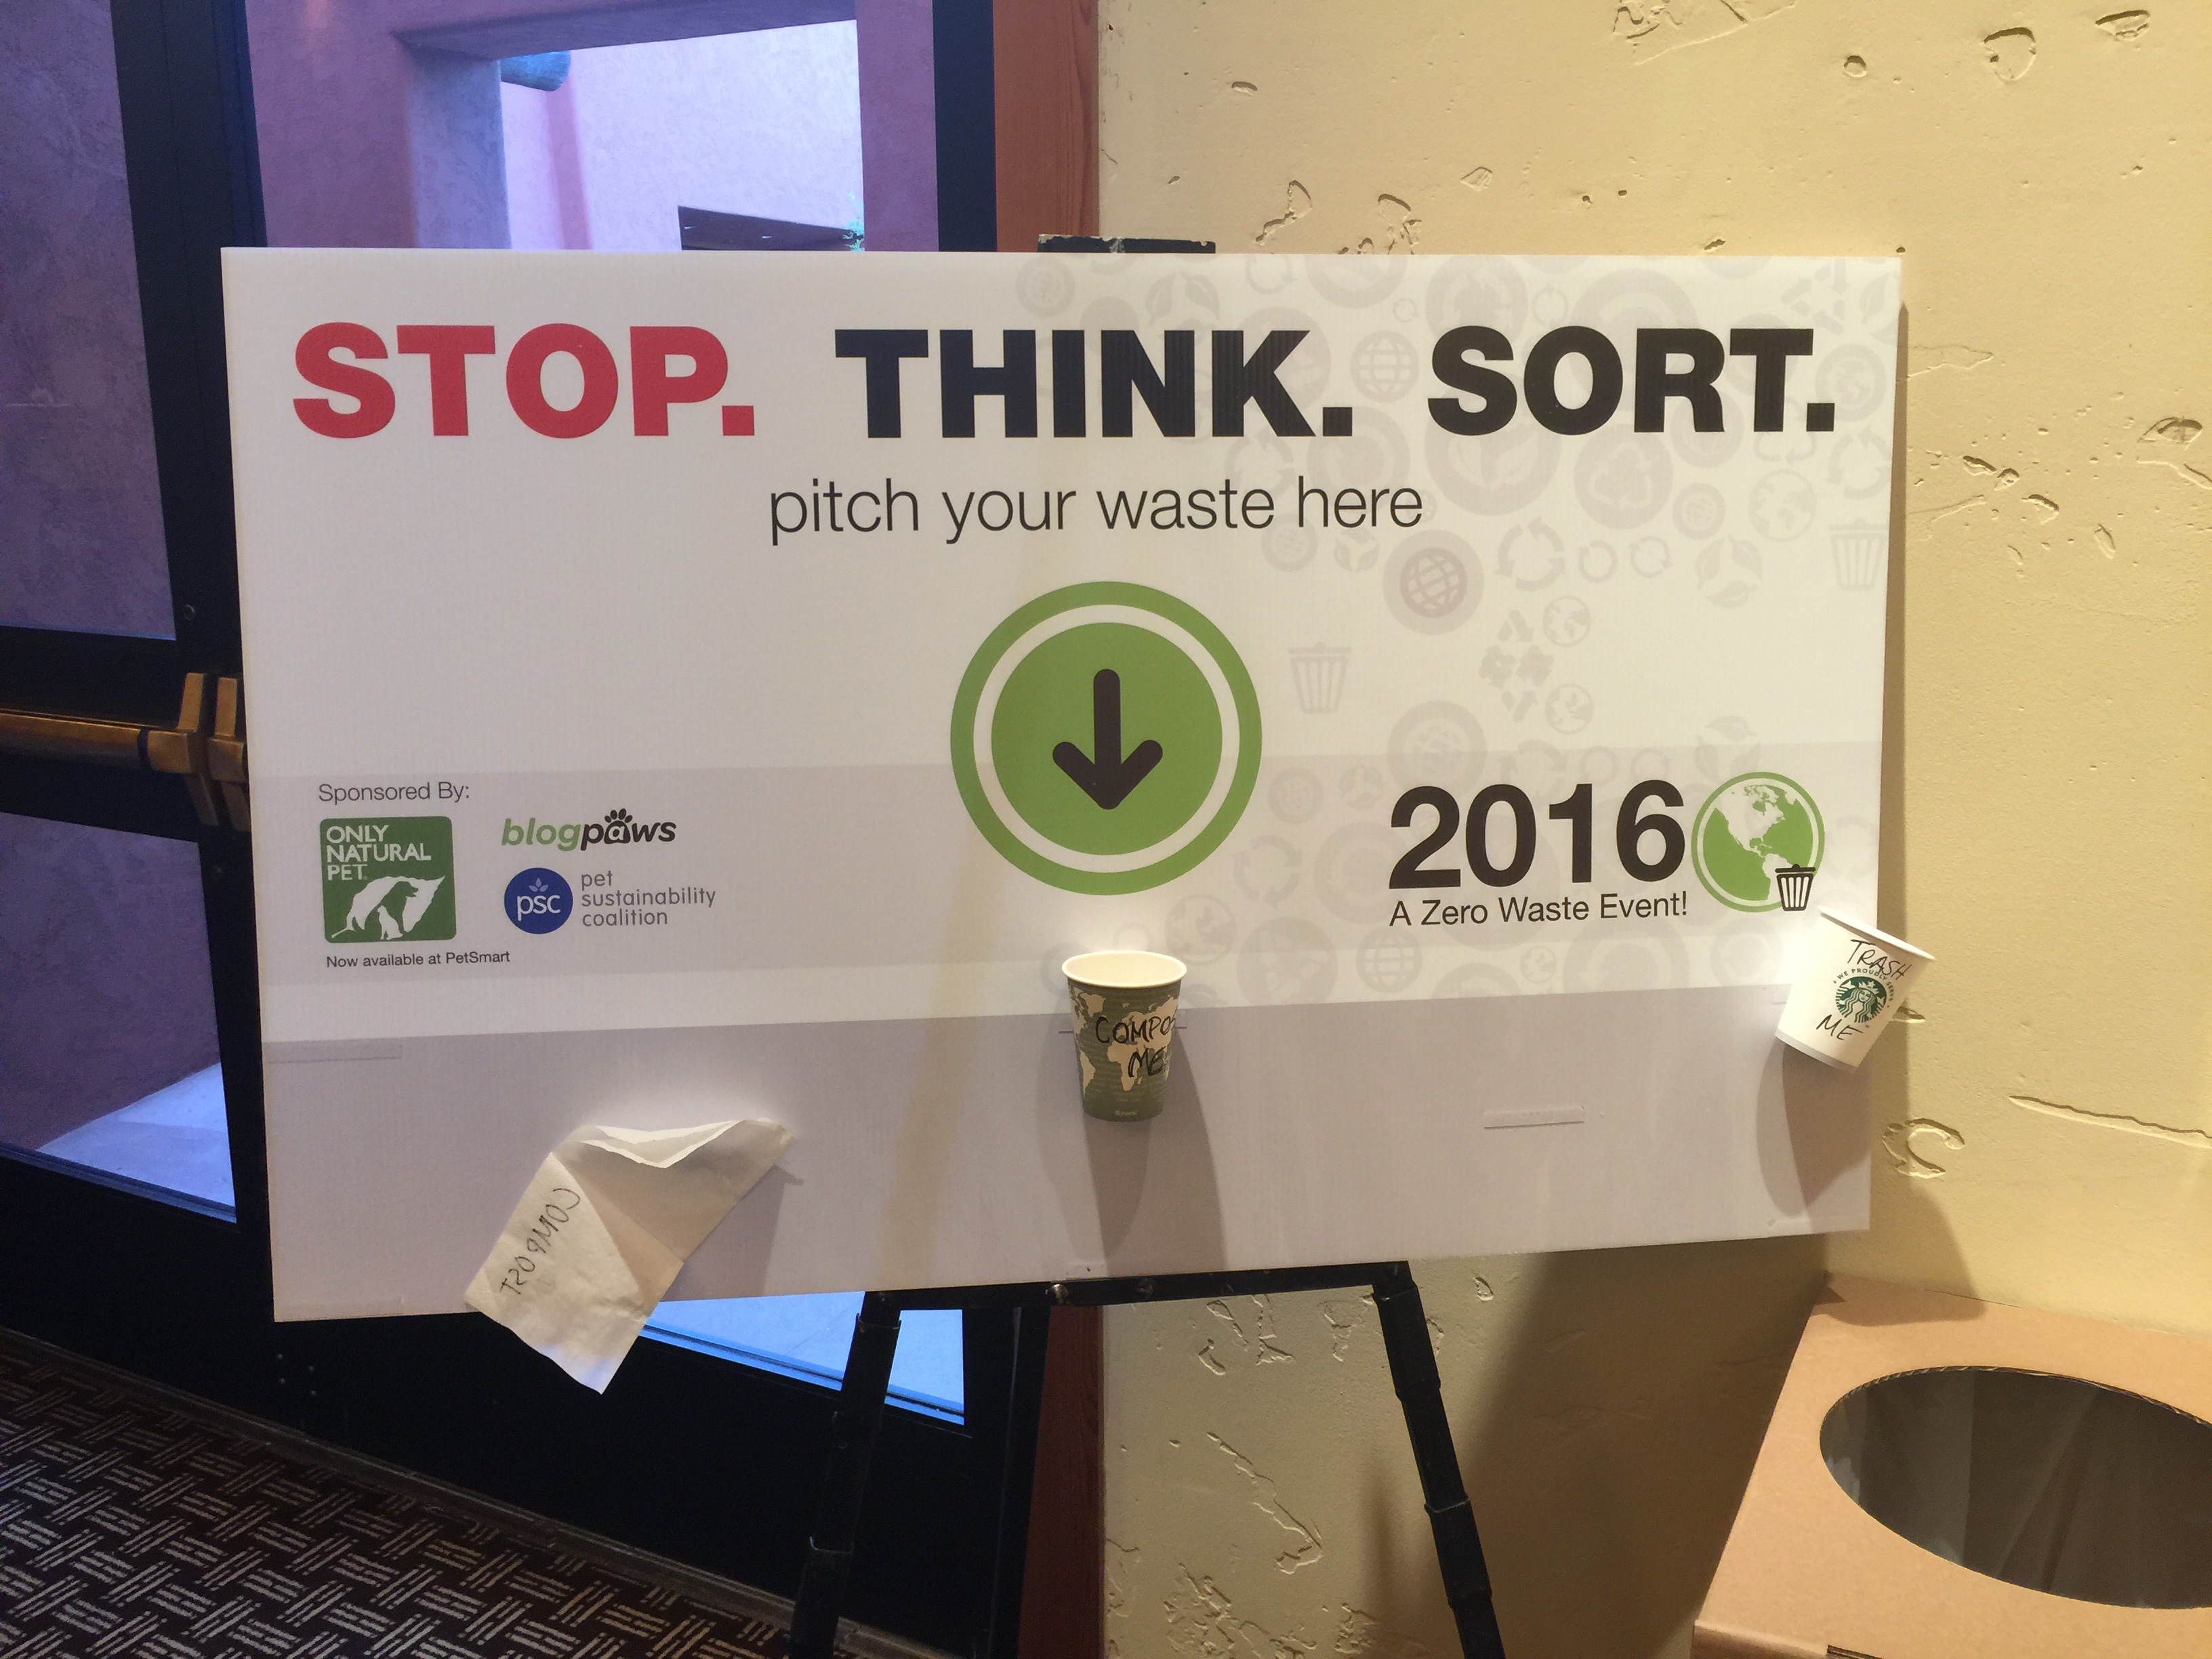 Stop and Think is the Message for Zero Waste at BlogPaws